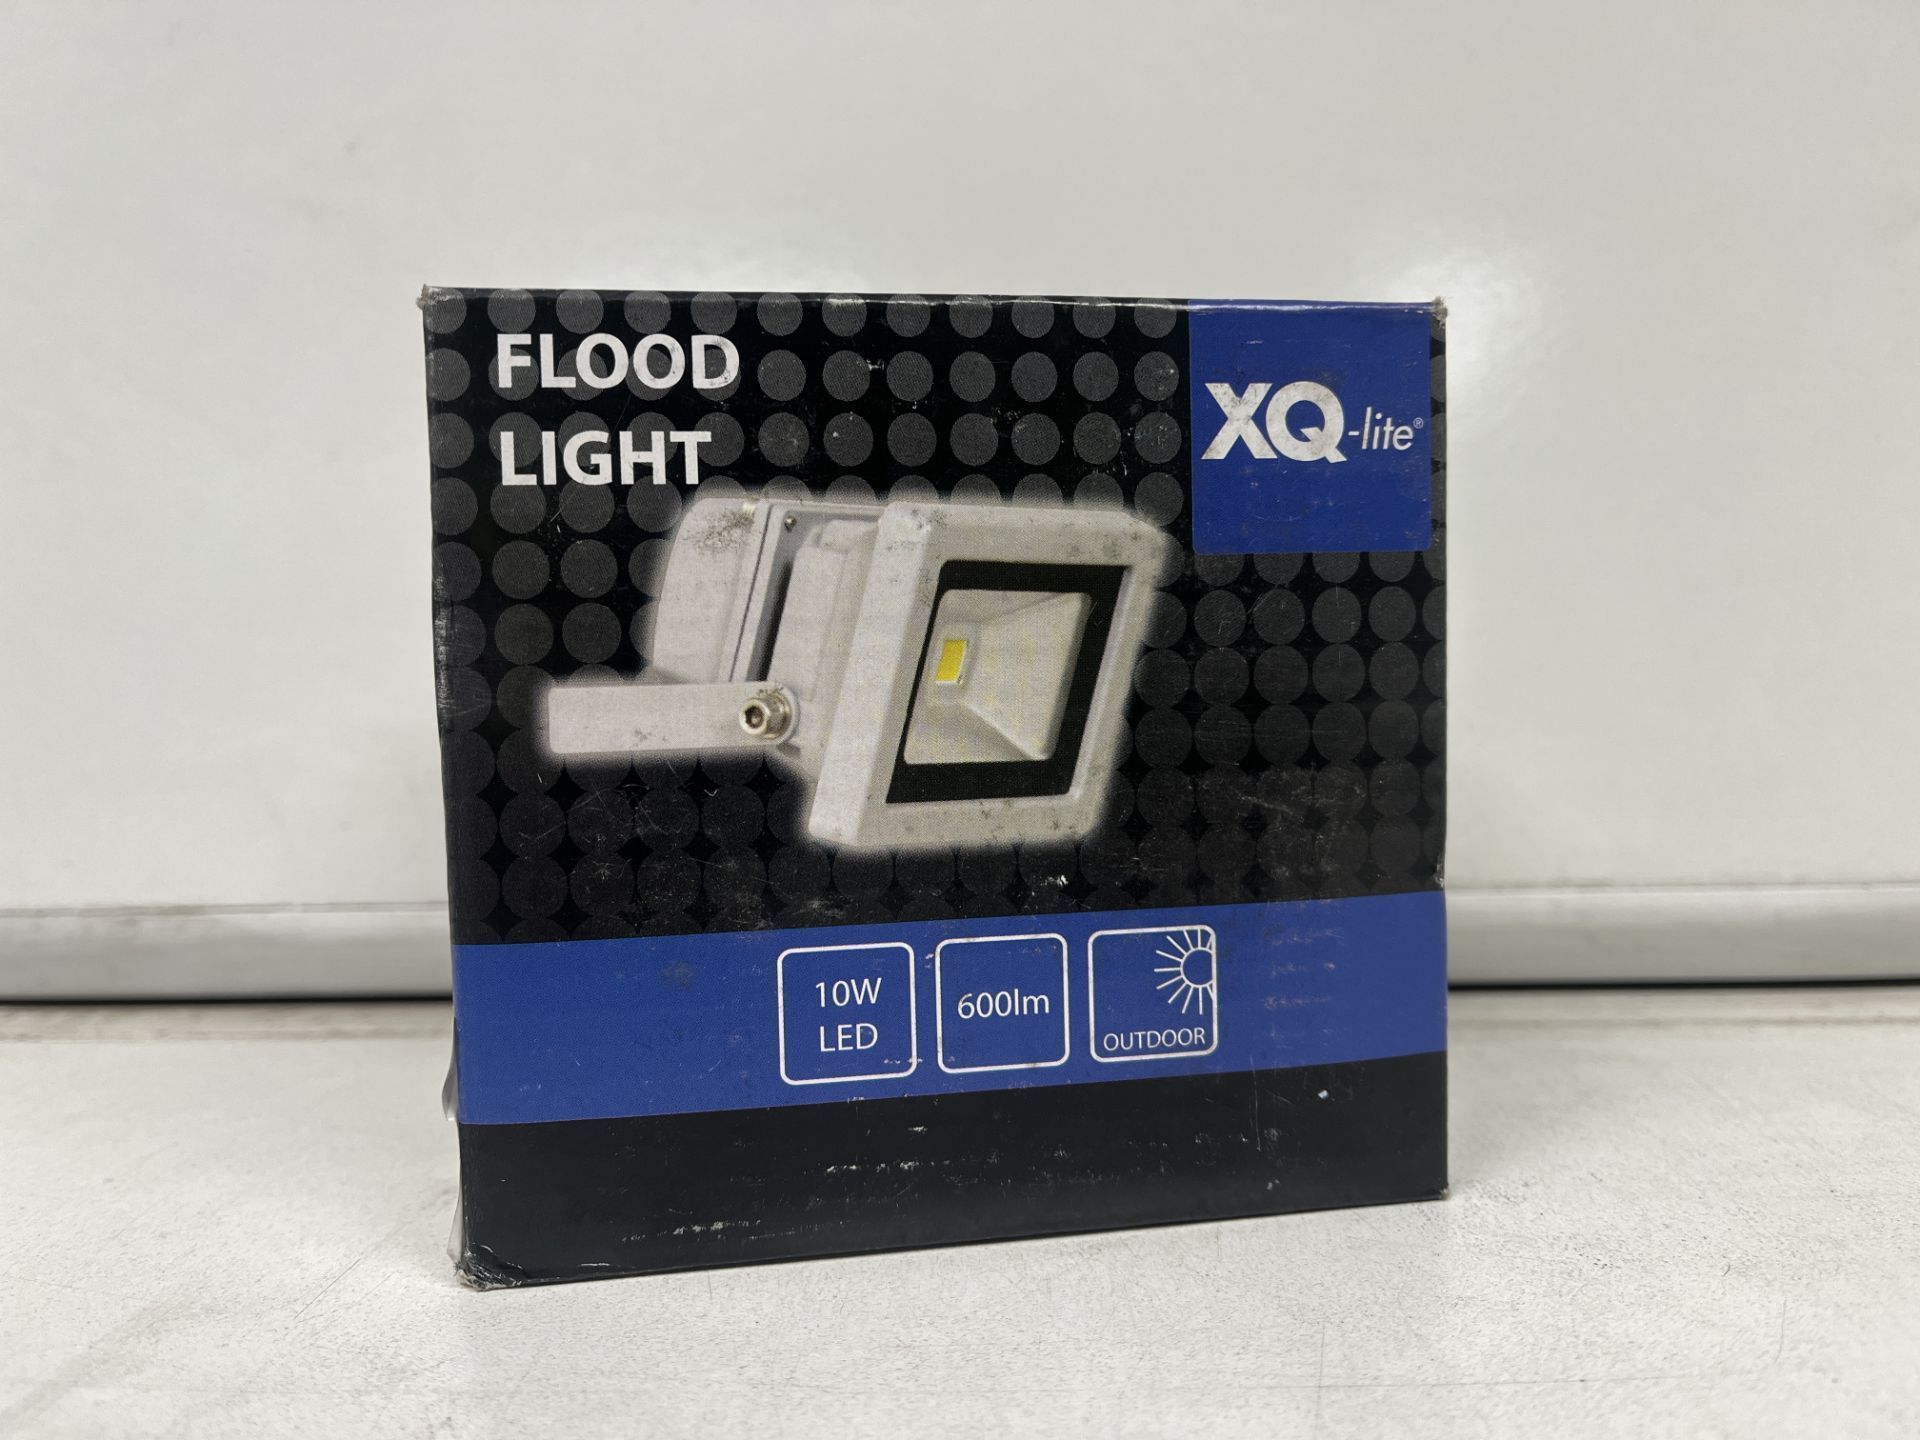 PALLET TO CONTAIN 60 X XQ-LITE MAINS POWERED COOL WHITE LED FLOODLIGHTS RRP £21 EACH R3.4